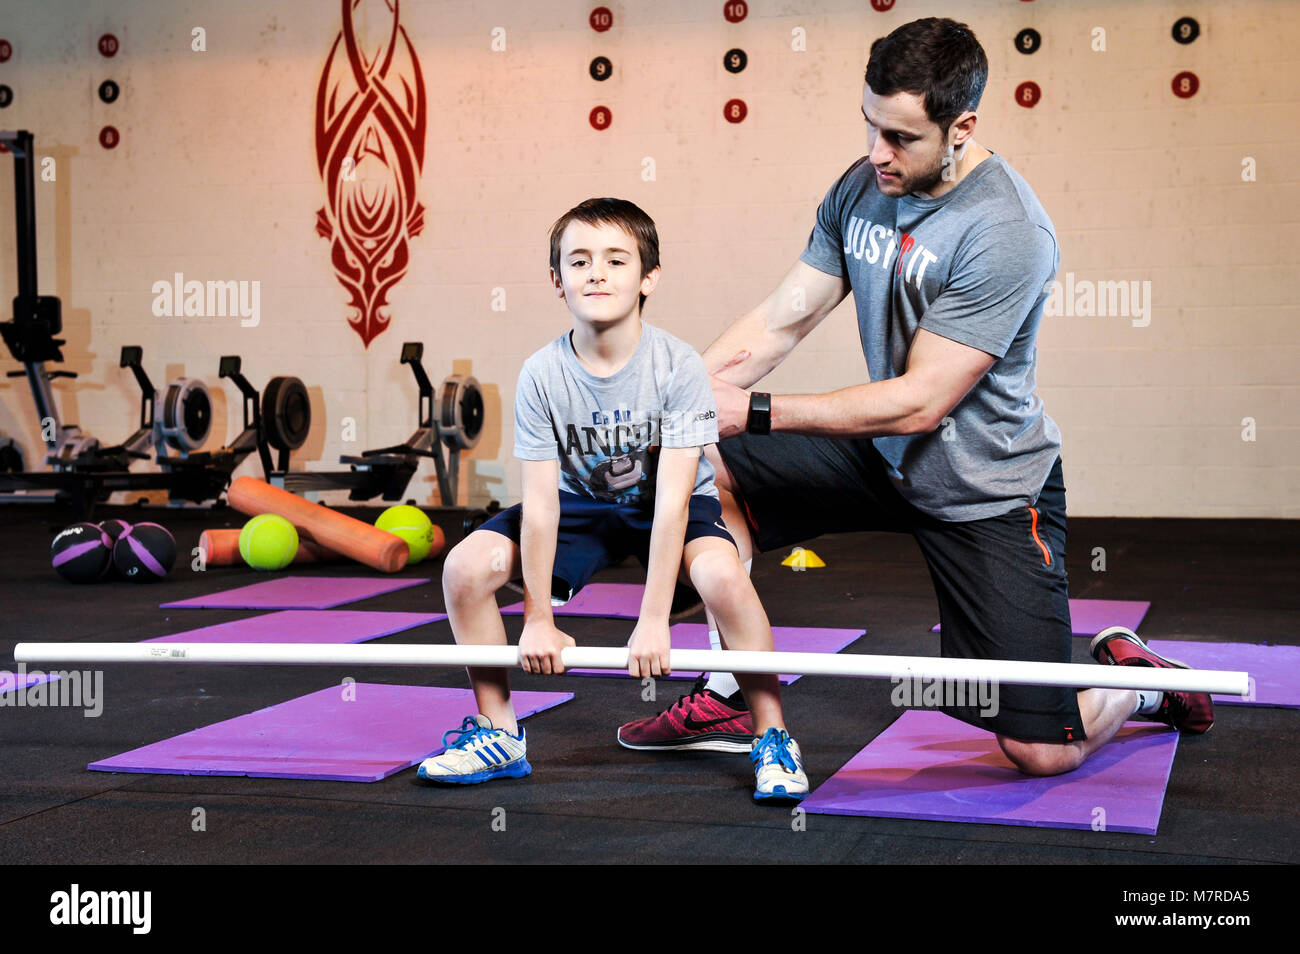 A young boy lifting a weights bar under the supervision of a  gym instructor. Showing how to lift properly Stock Photo